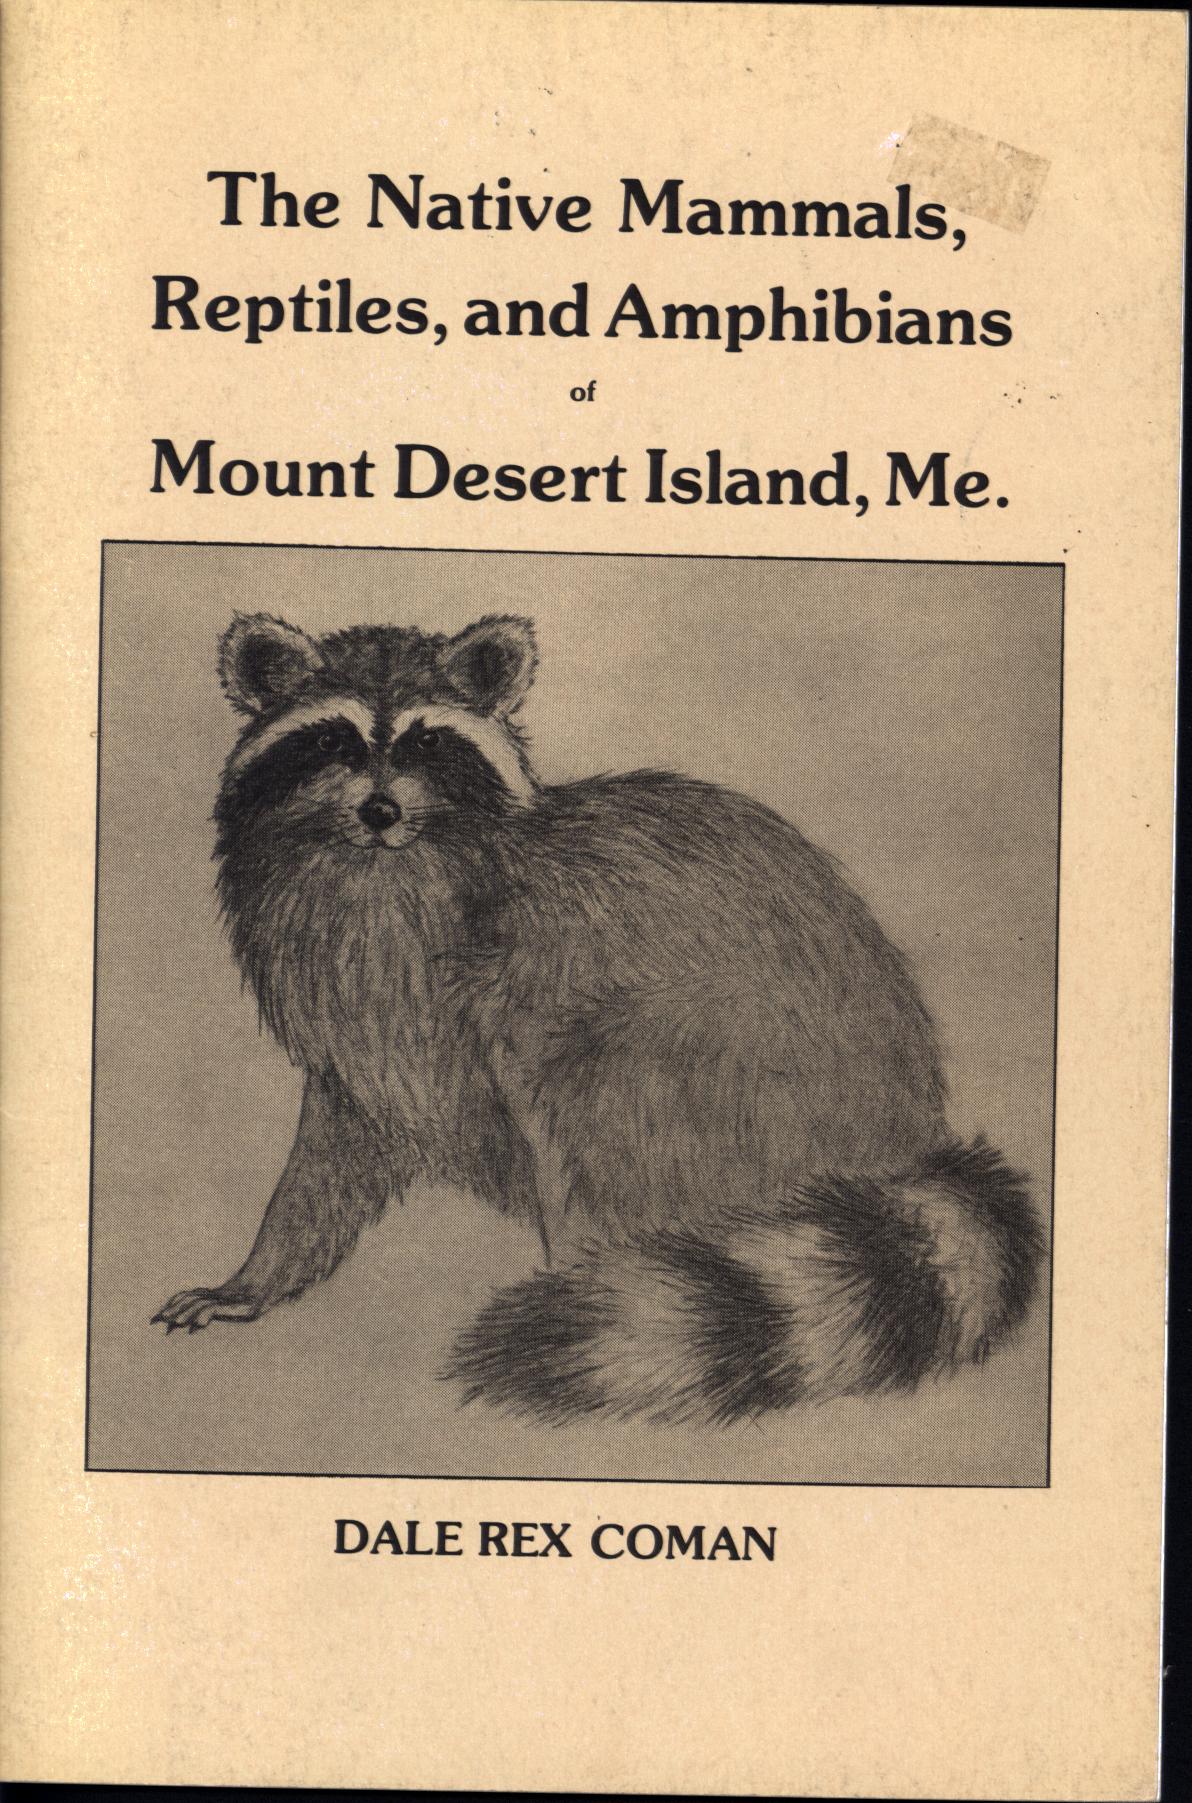 THE NATIVE MAMMALS, REPTILES and AMPHIBIANS OF MOUNT DESERT ISLAND, MAINE.